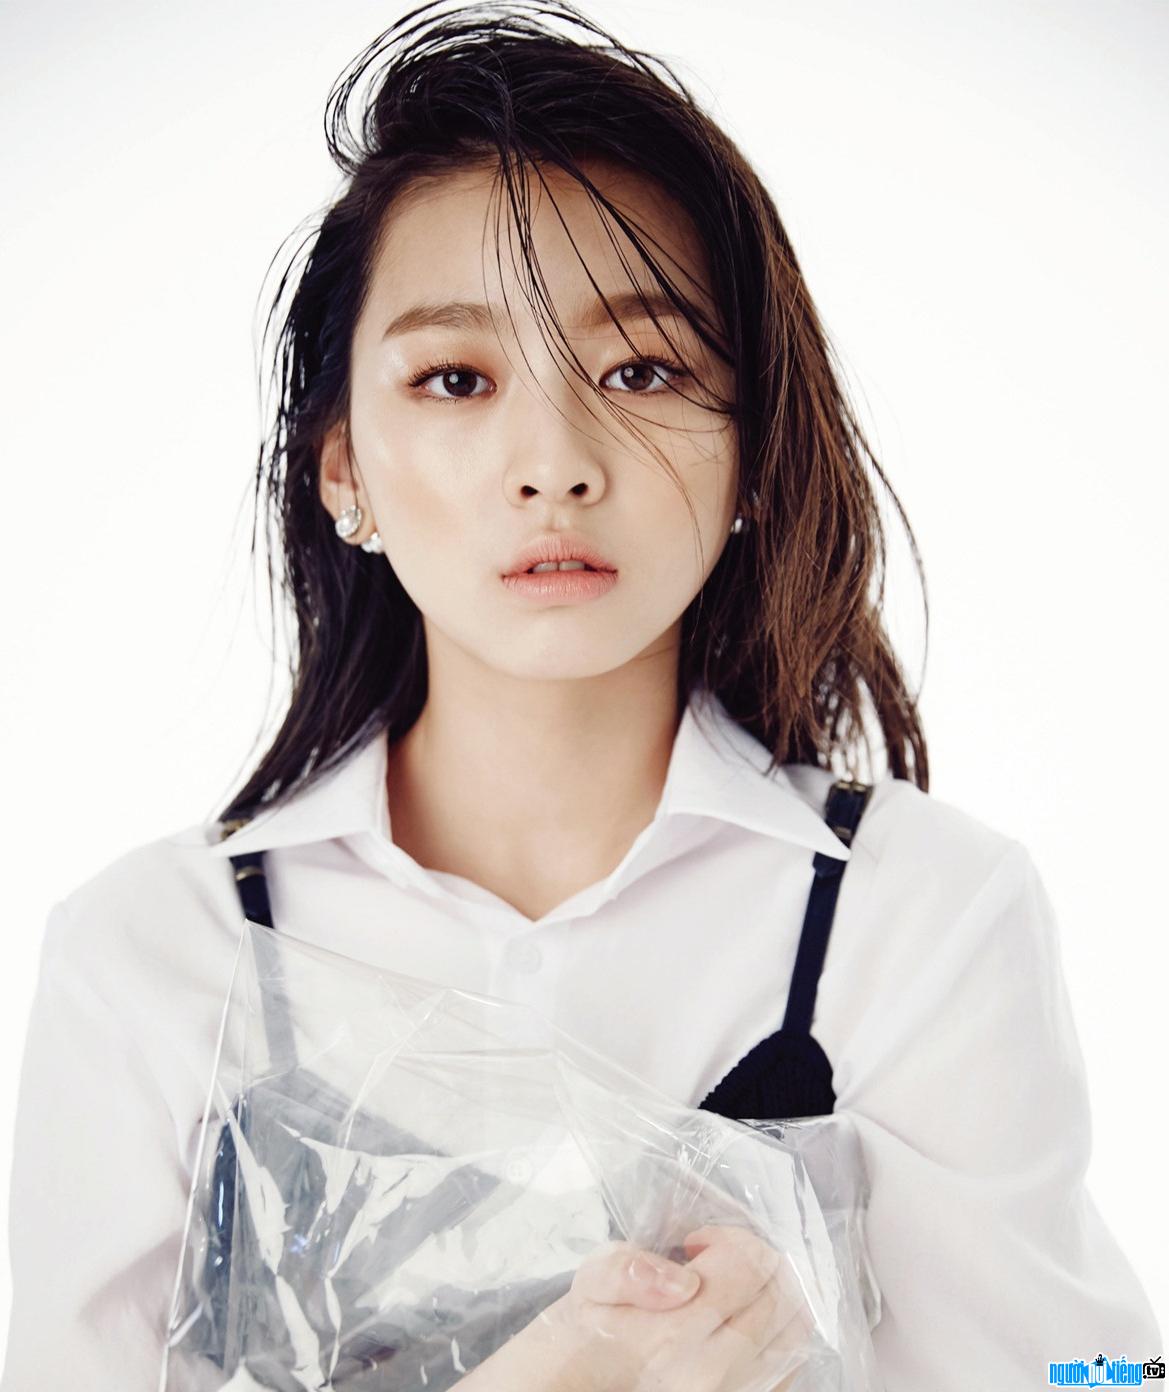  Image of child star Lee Soo Min with a professional demeanor